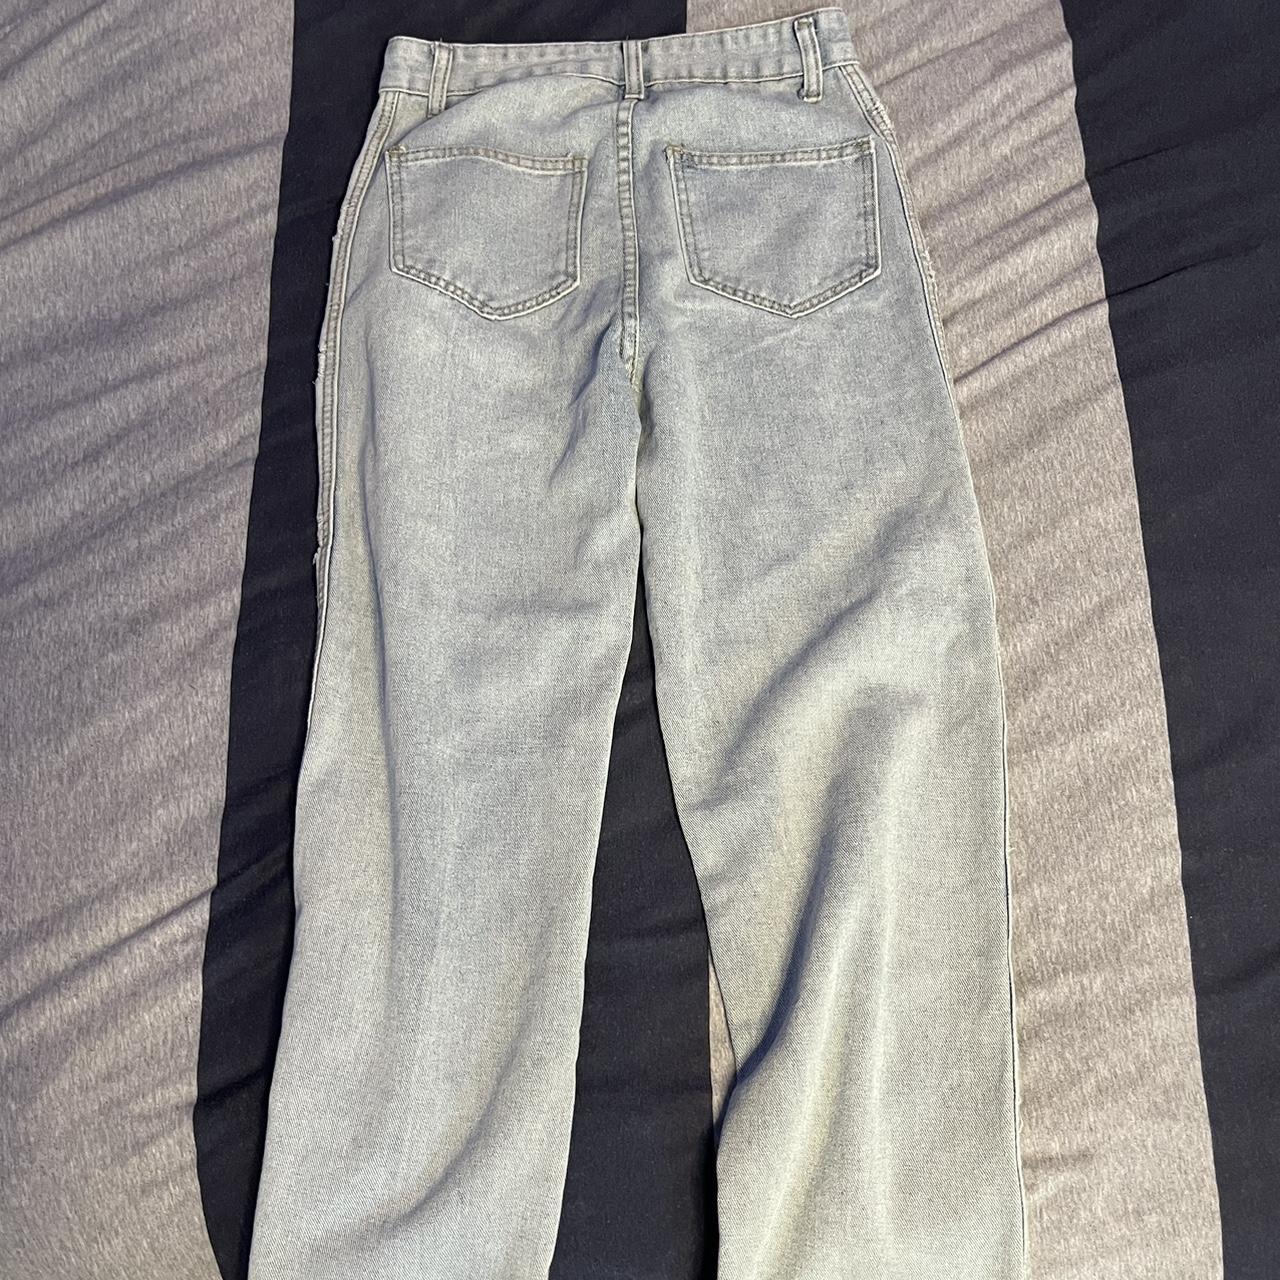 Baggy jeans that are very comfortable - Depop